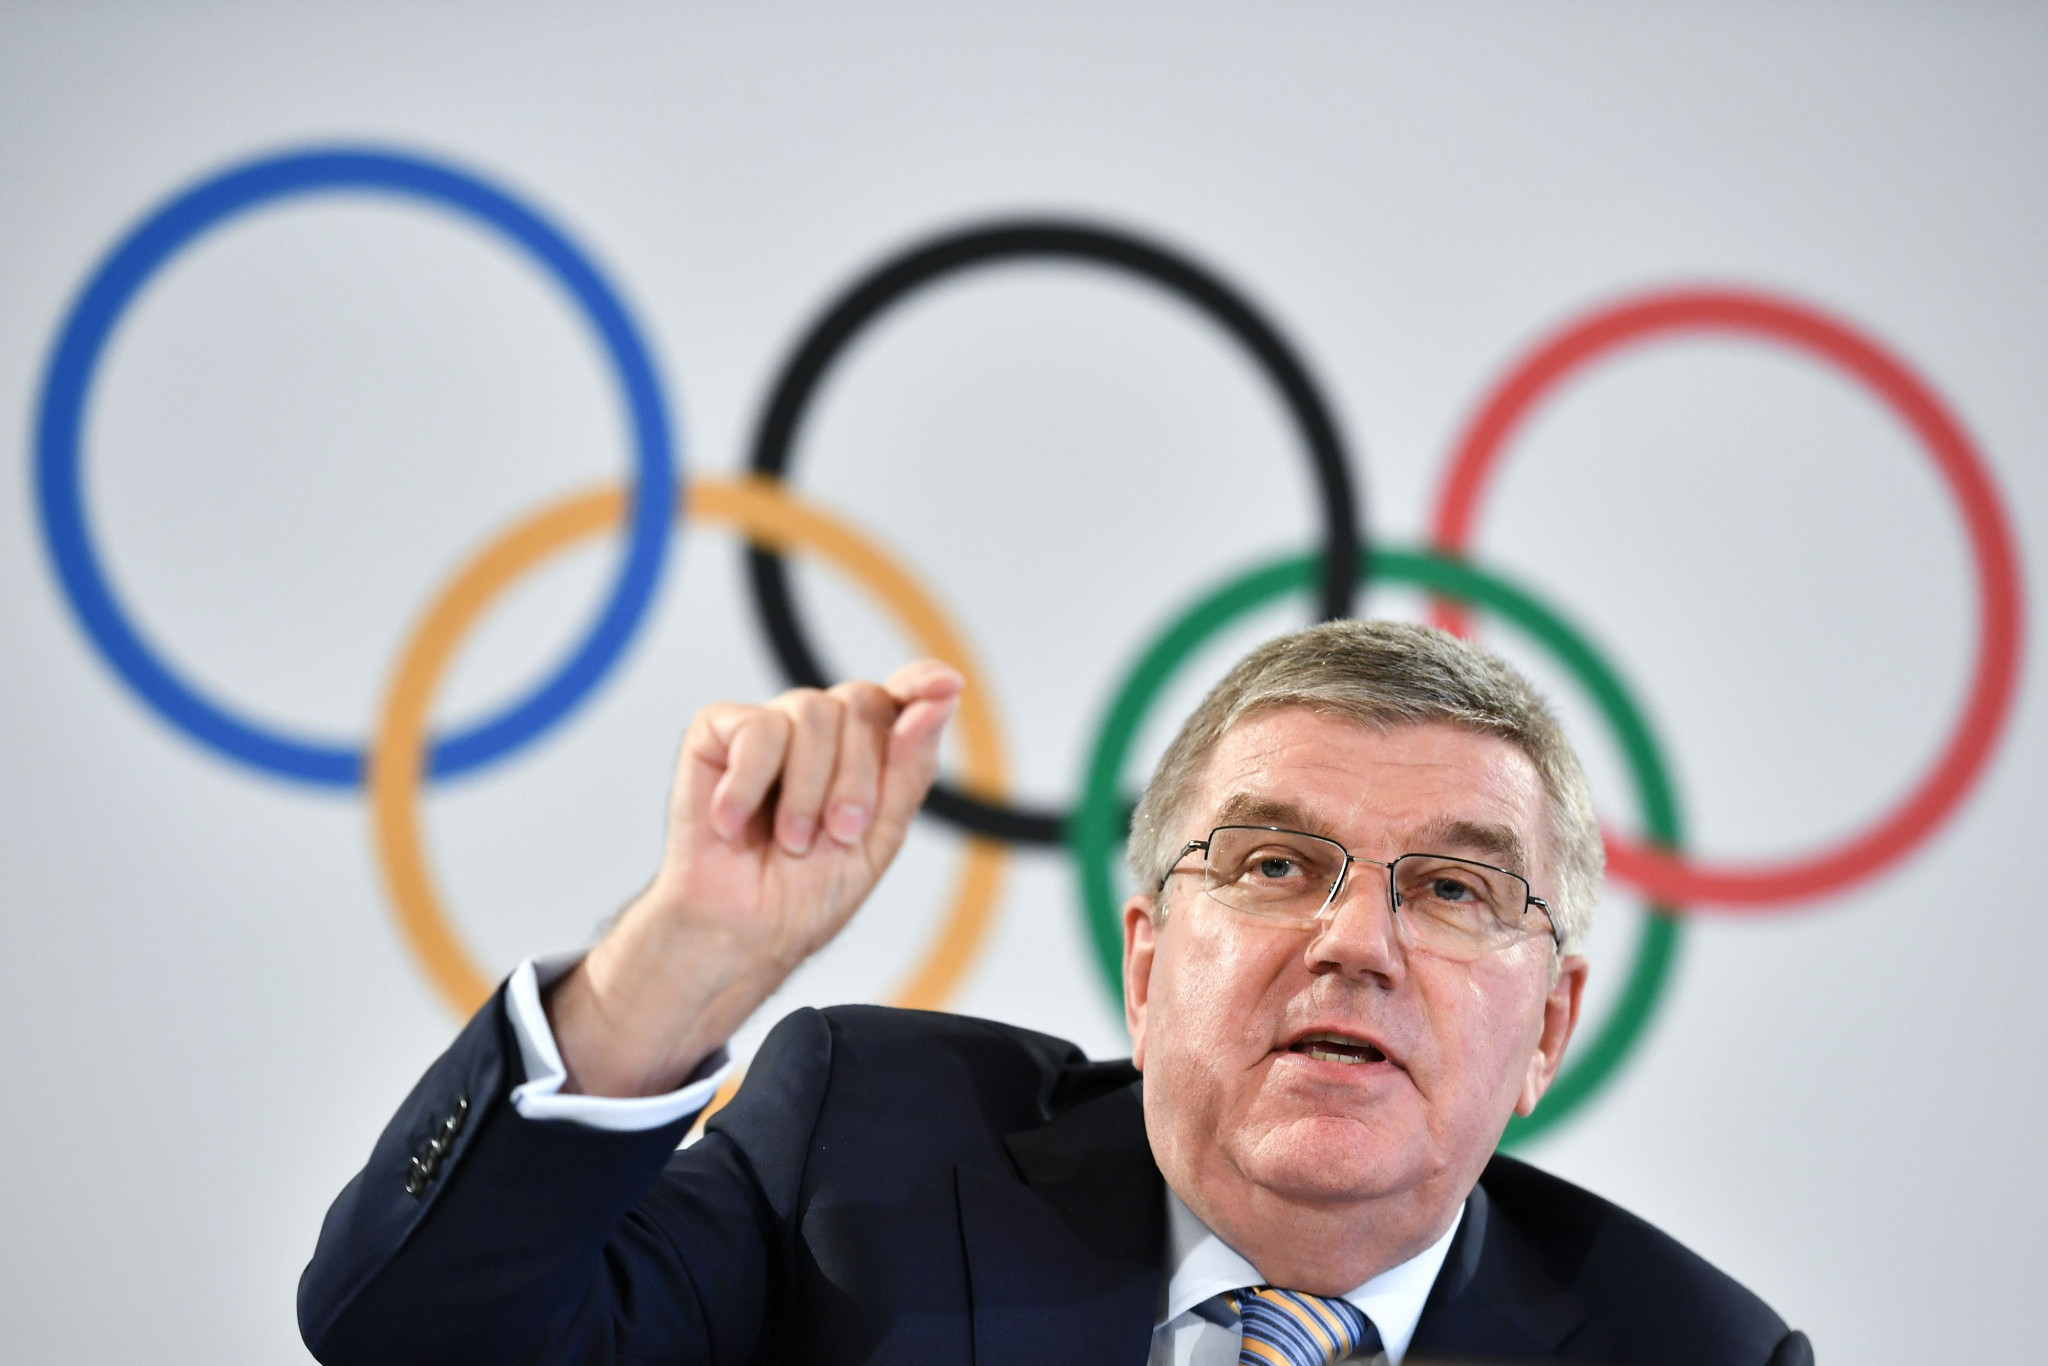 IOC President Thomas Bach has suggested the organisation want a reduced field in future Olympic bidding races ©Getty Images